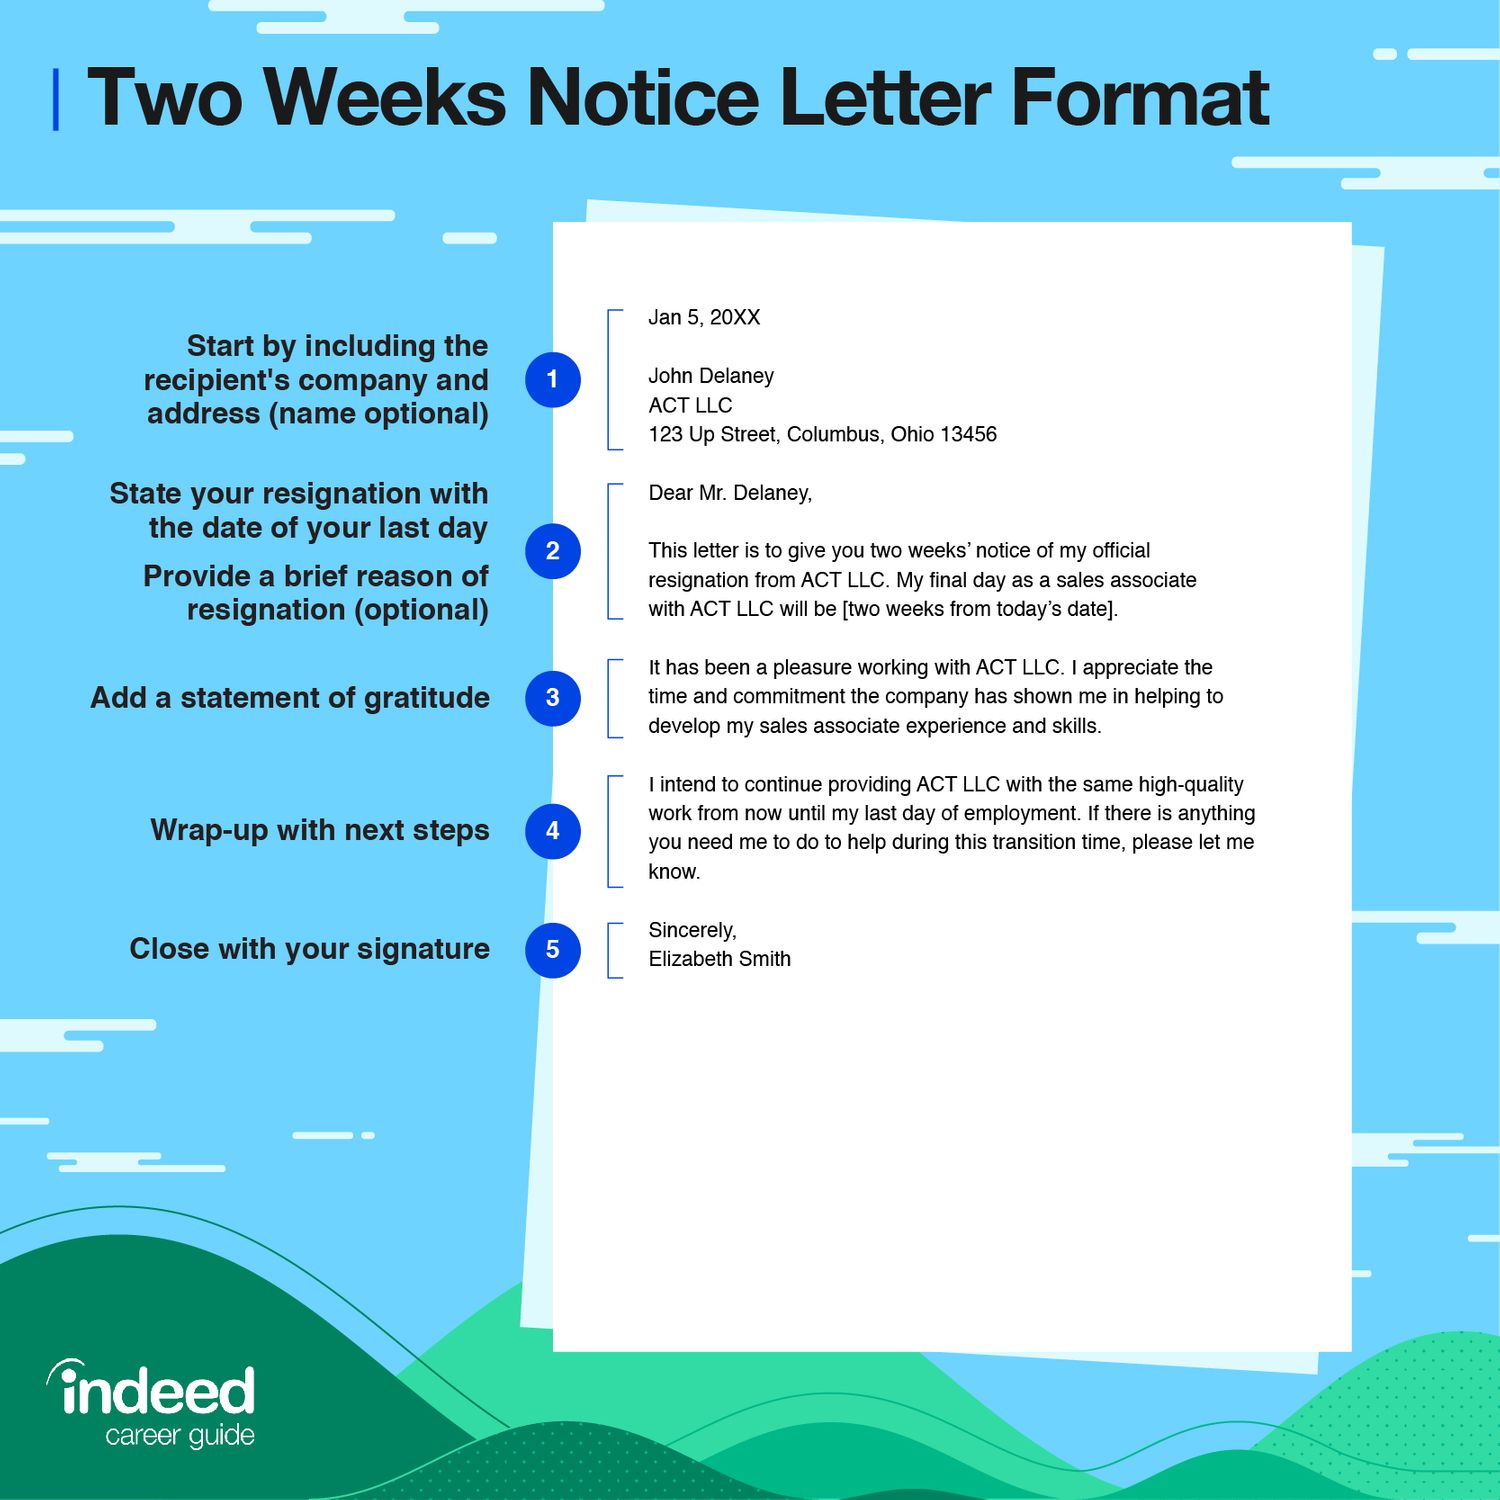 Two Weeks Notice Letter Format